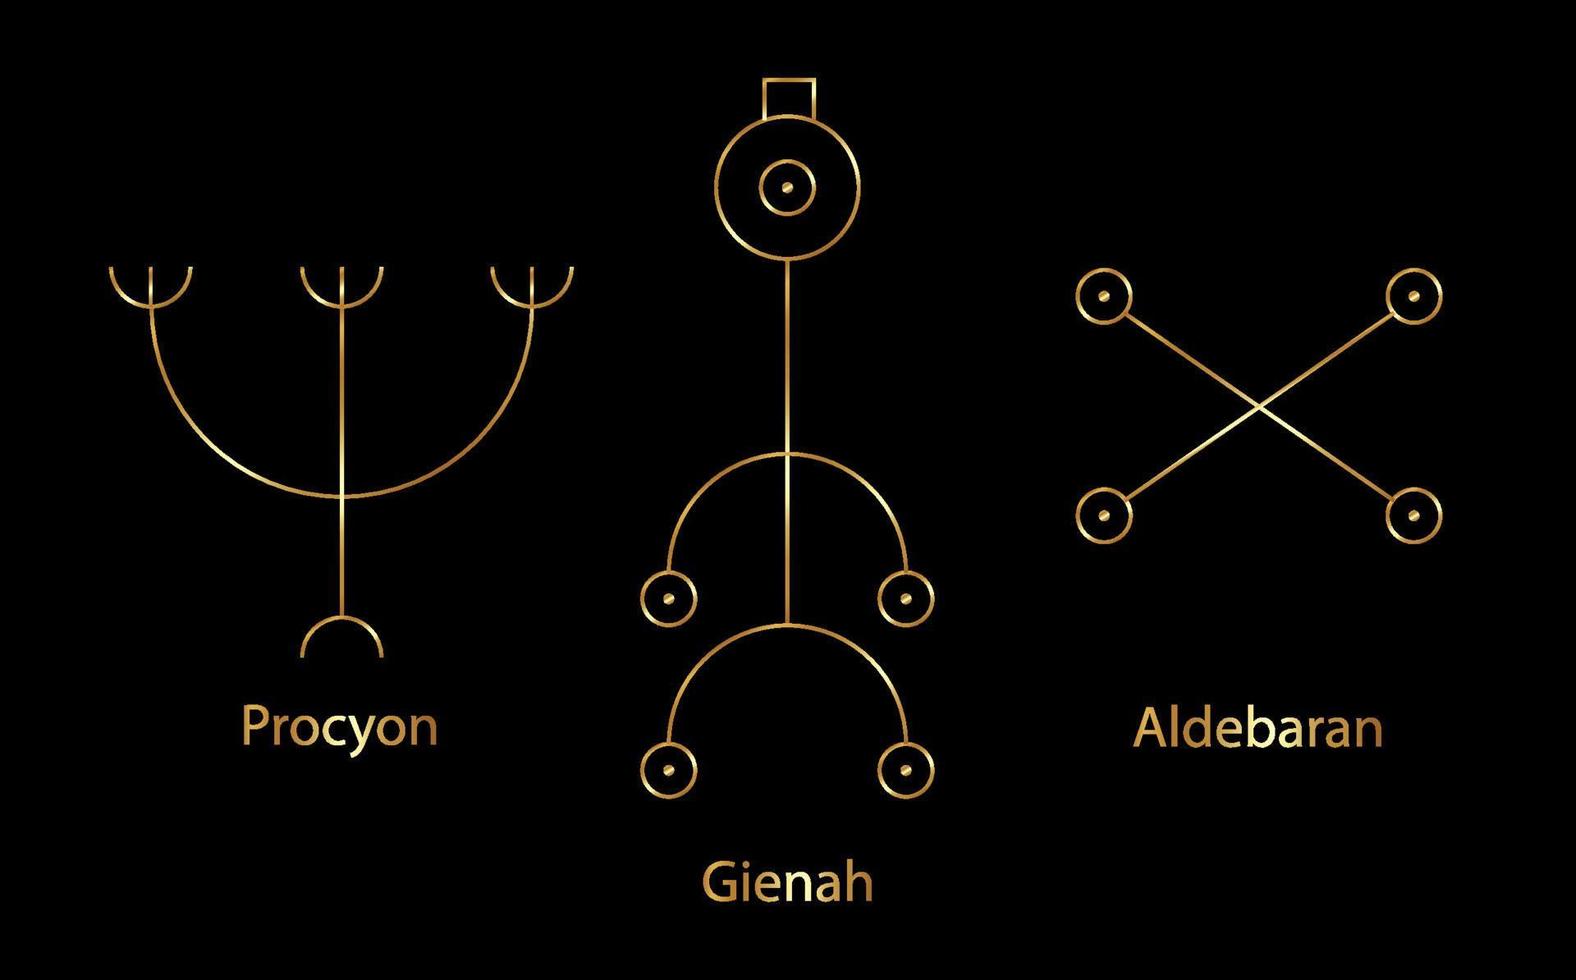 Astrology Stars, PROCYON or Canis Minor, GIENAH or Corvus, ALDEBARAN or Oculus Tauri. Set Hieroglyphic sign, hermetic kabbalistic magic symbols. Gold Line art Vector isolated on black background